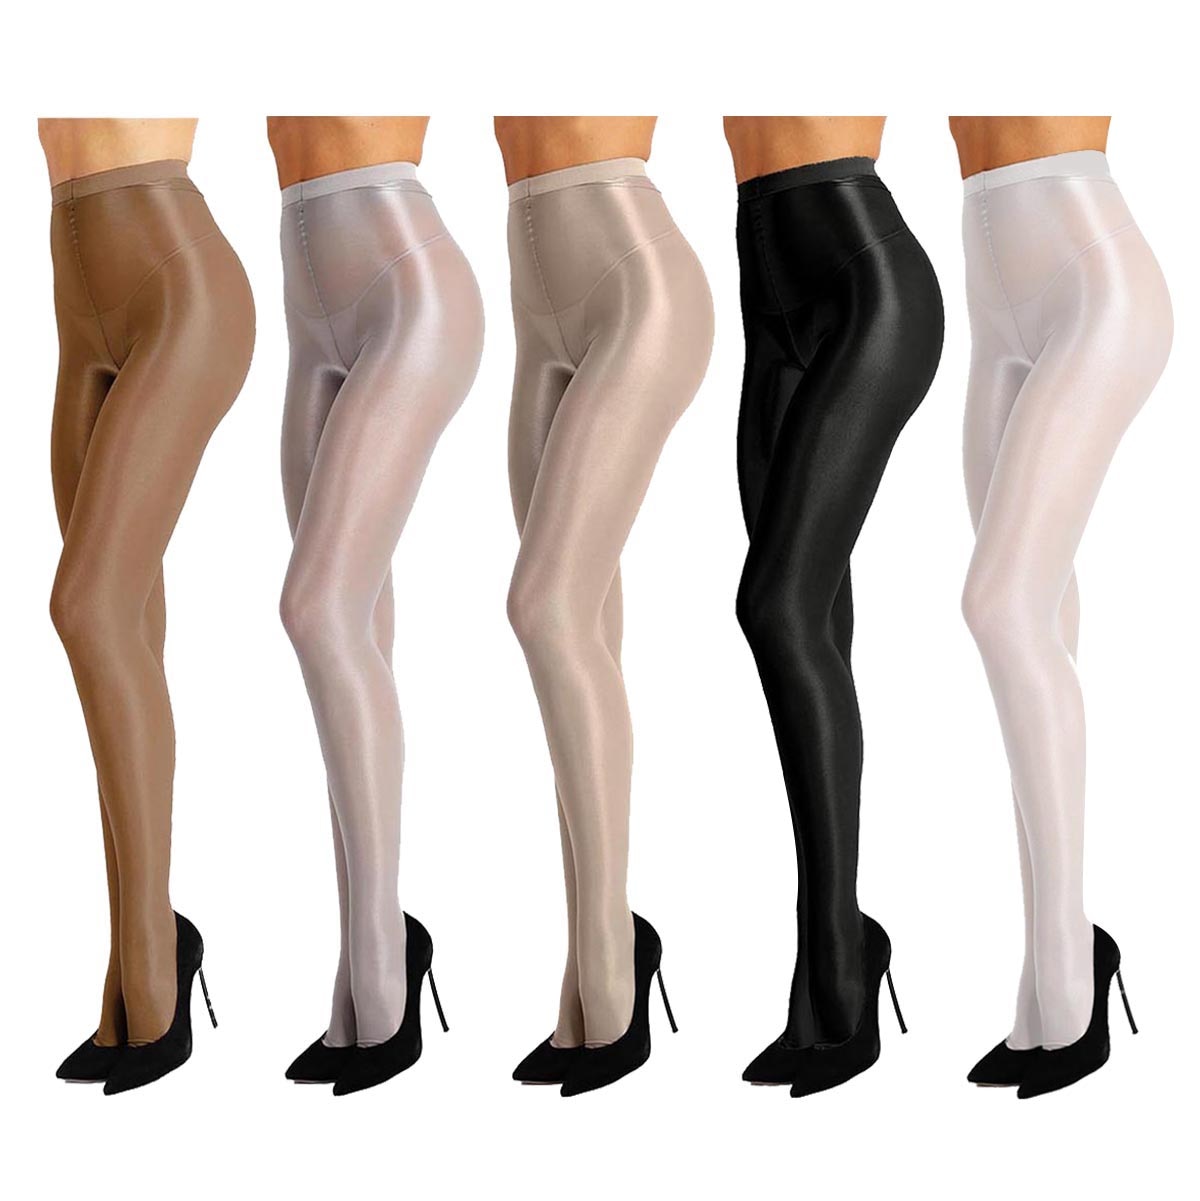 Girls Shimmer Tights - Footed Tights